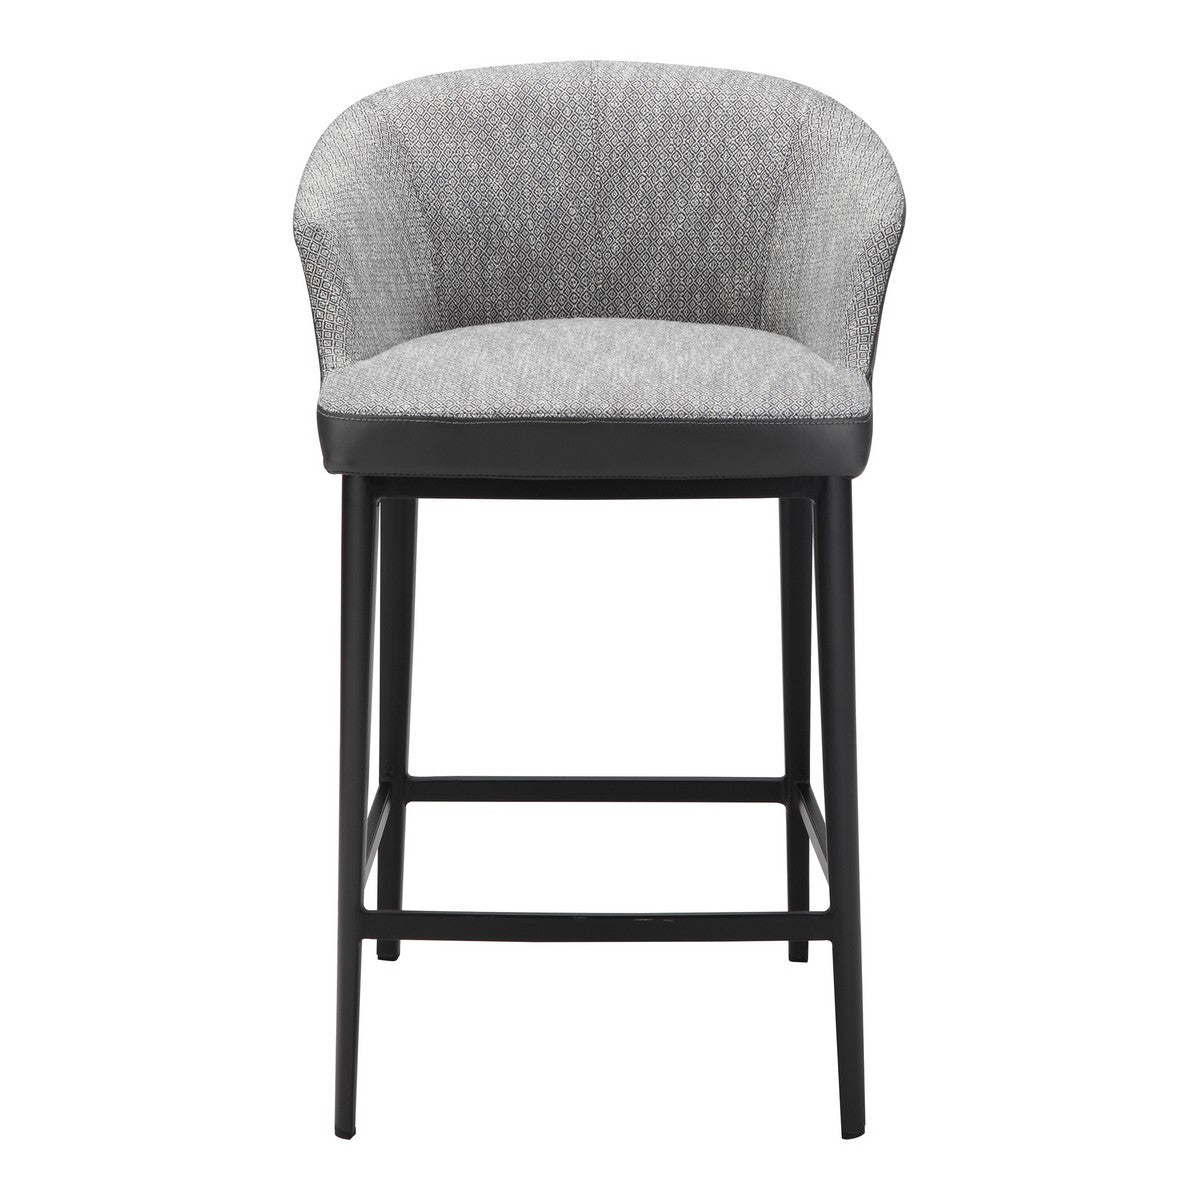 Moe's Home Collection Beckett Counter Stool Grey - EJ-1028-15 - Moe's Home Collection - Counter Stools - Minimal And Modern - 1